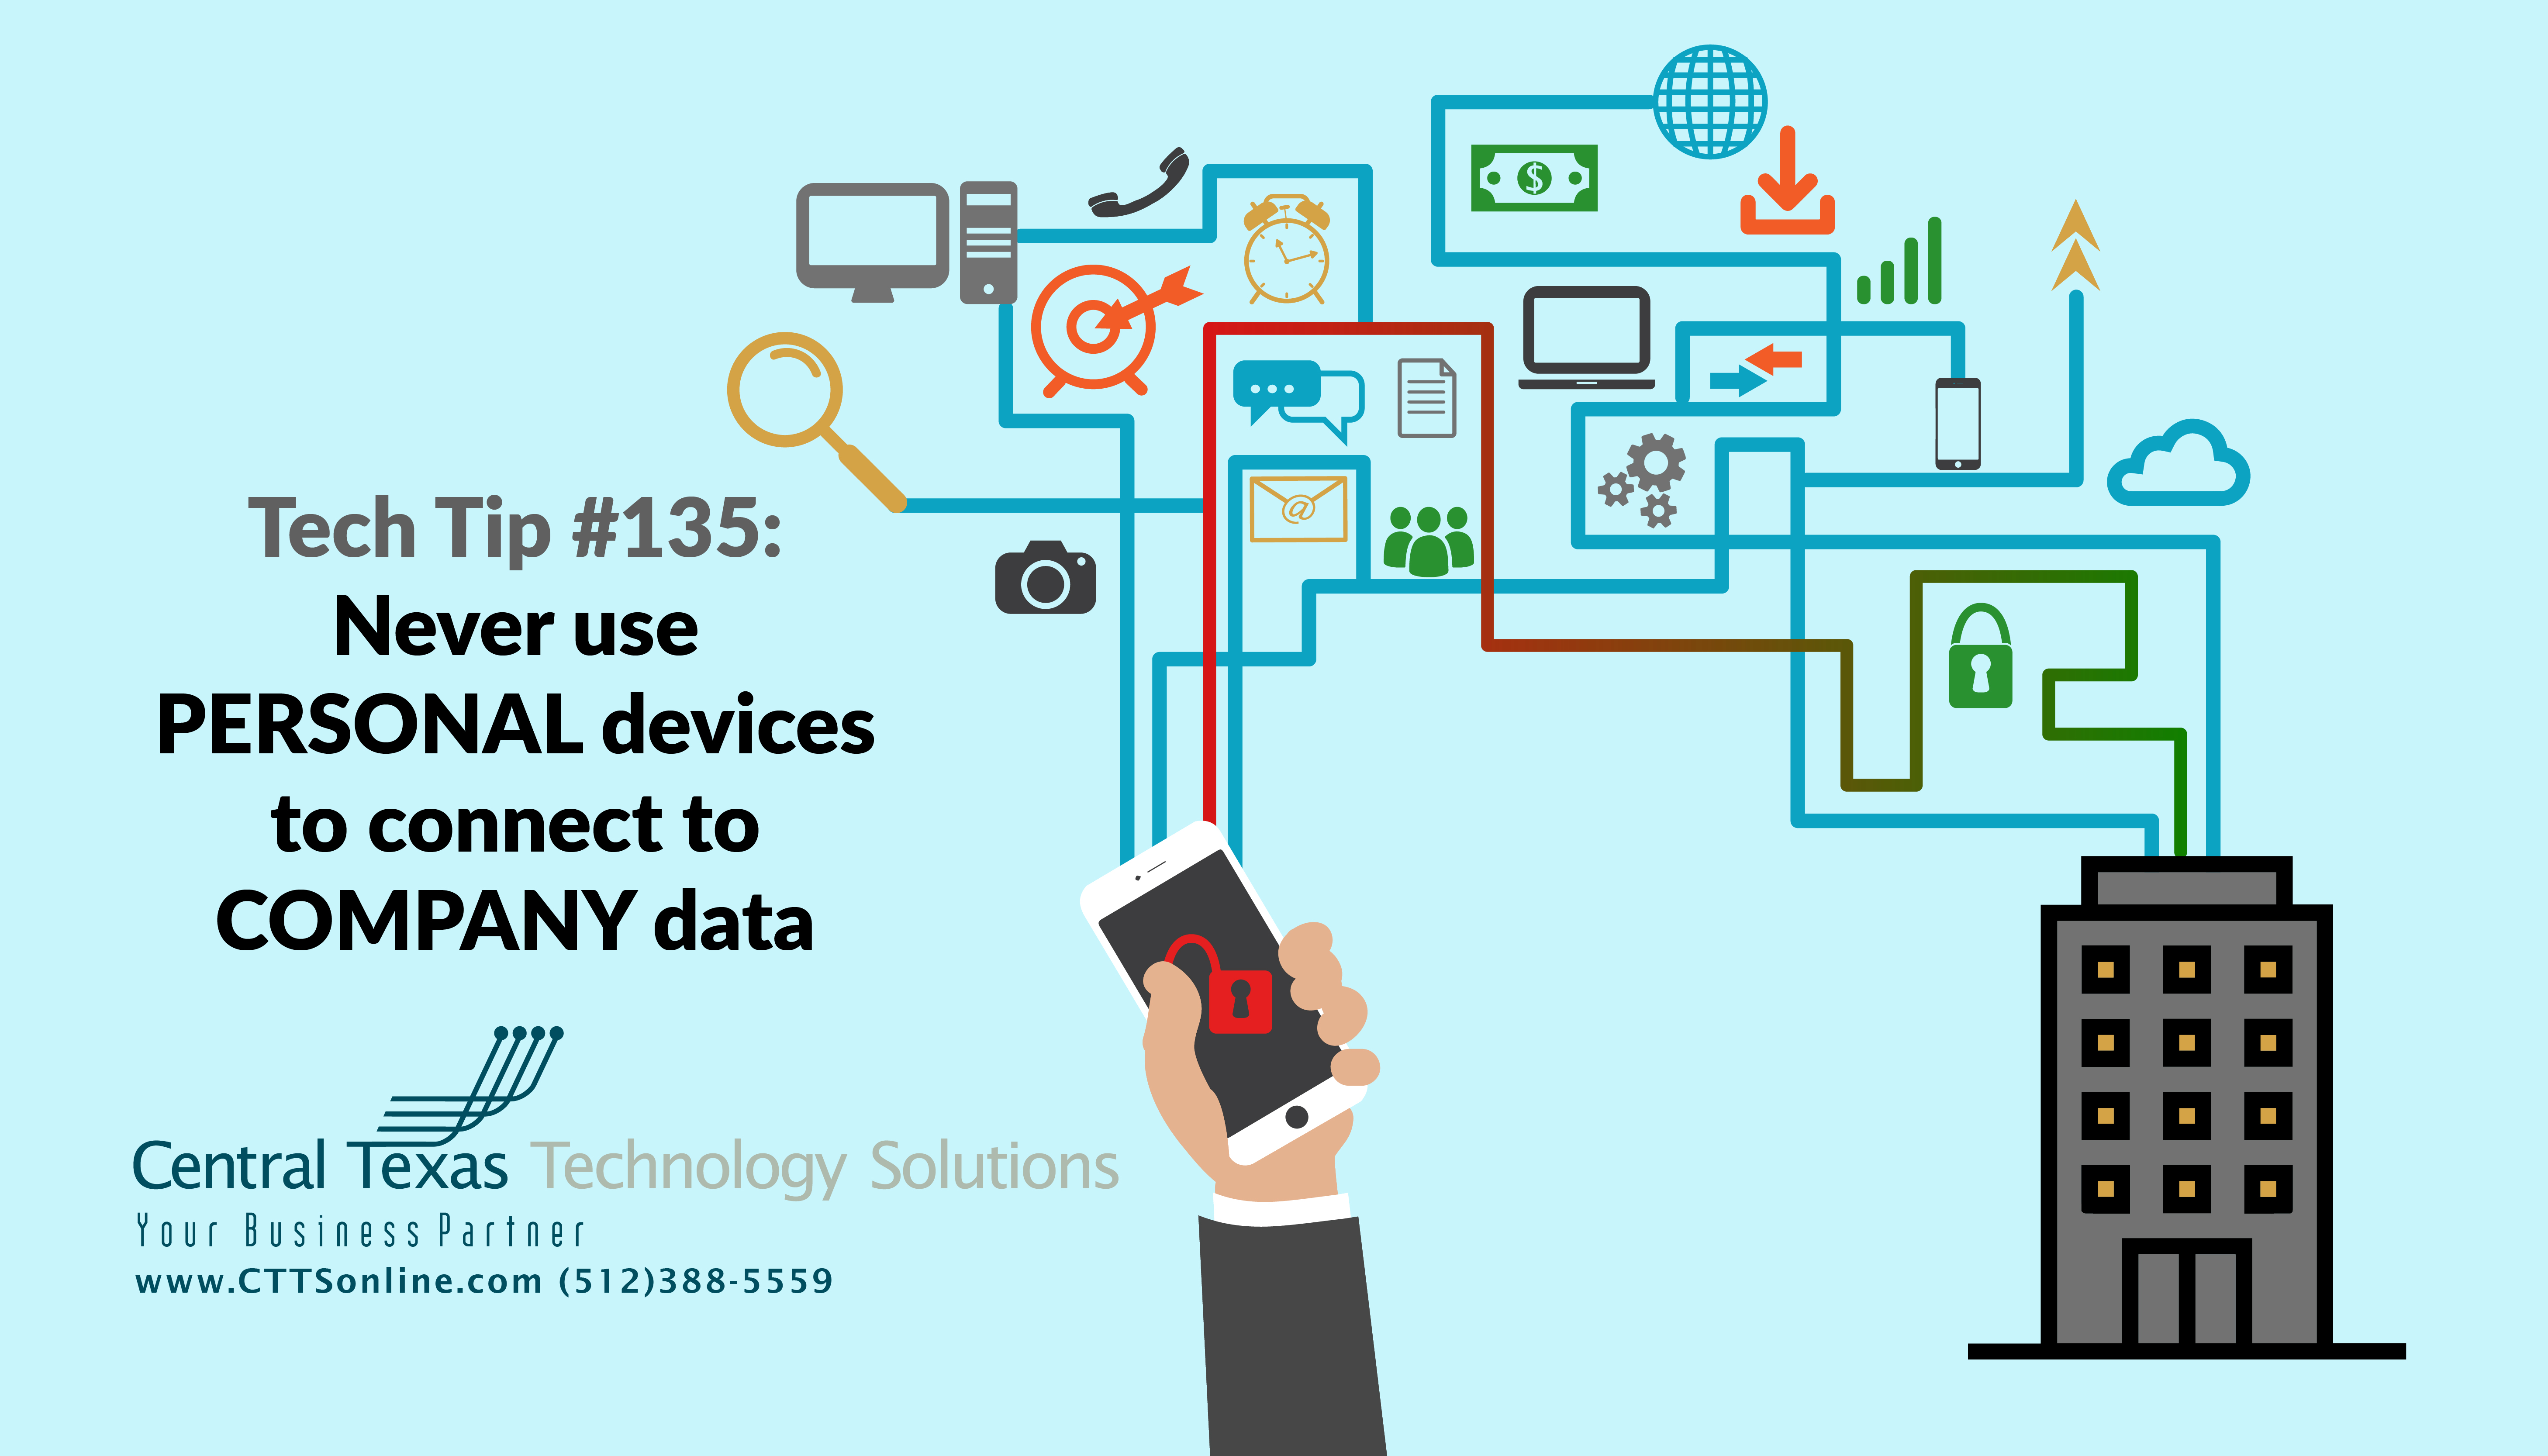 mobile device management and security Georgetown TX